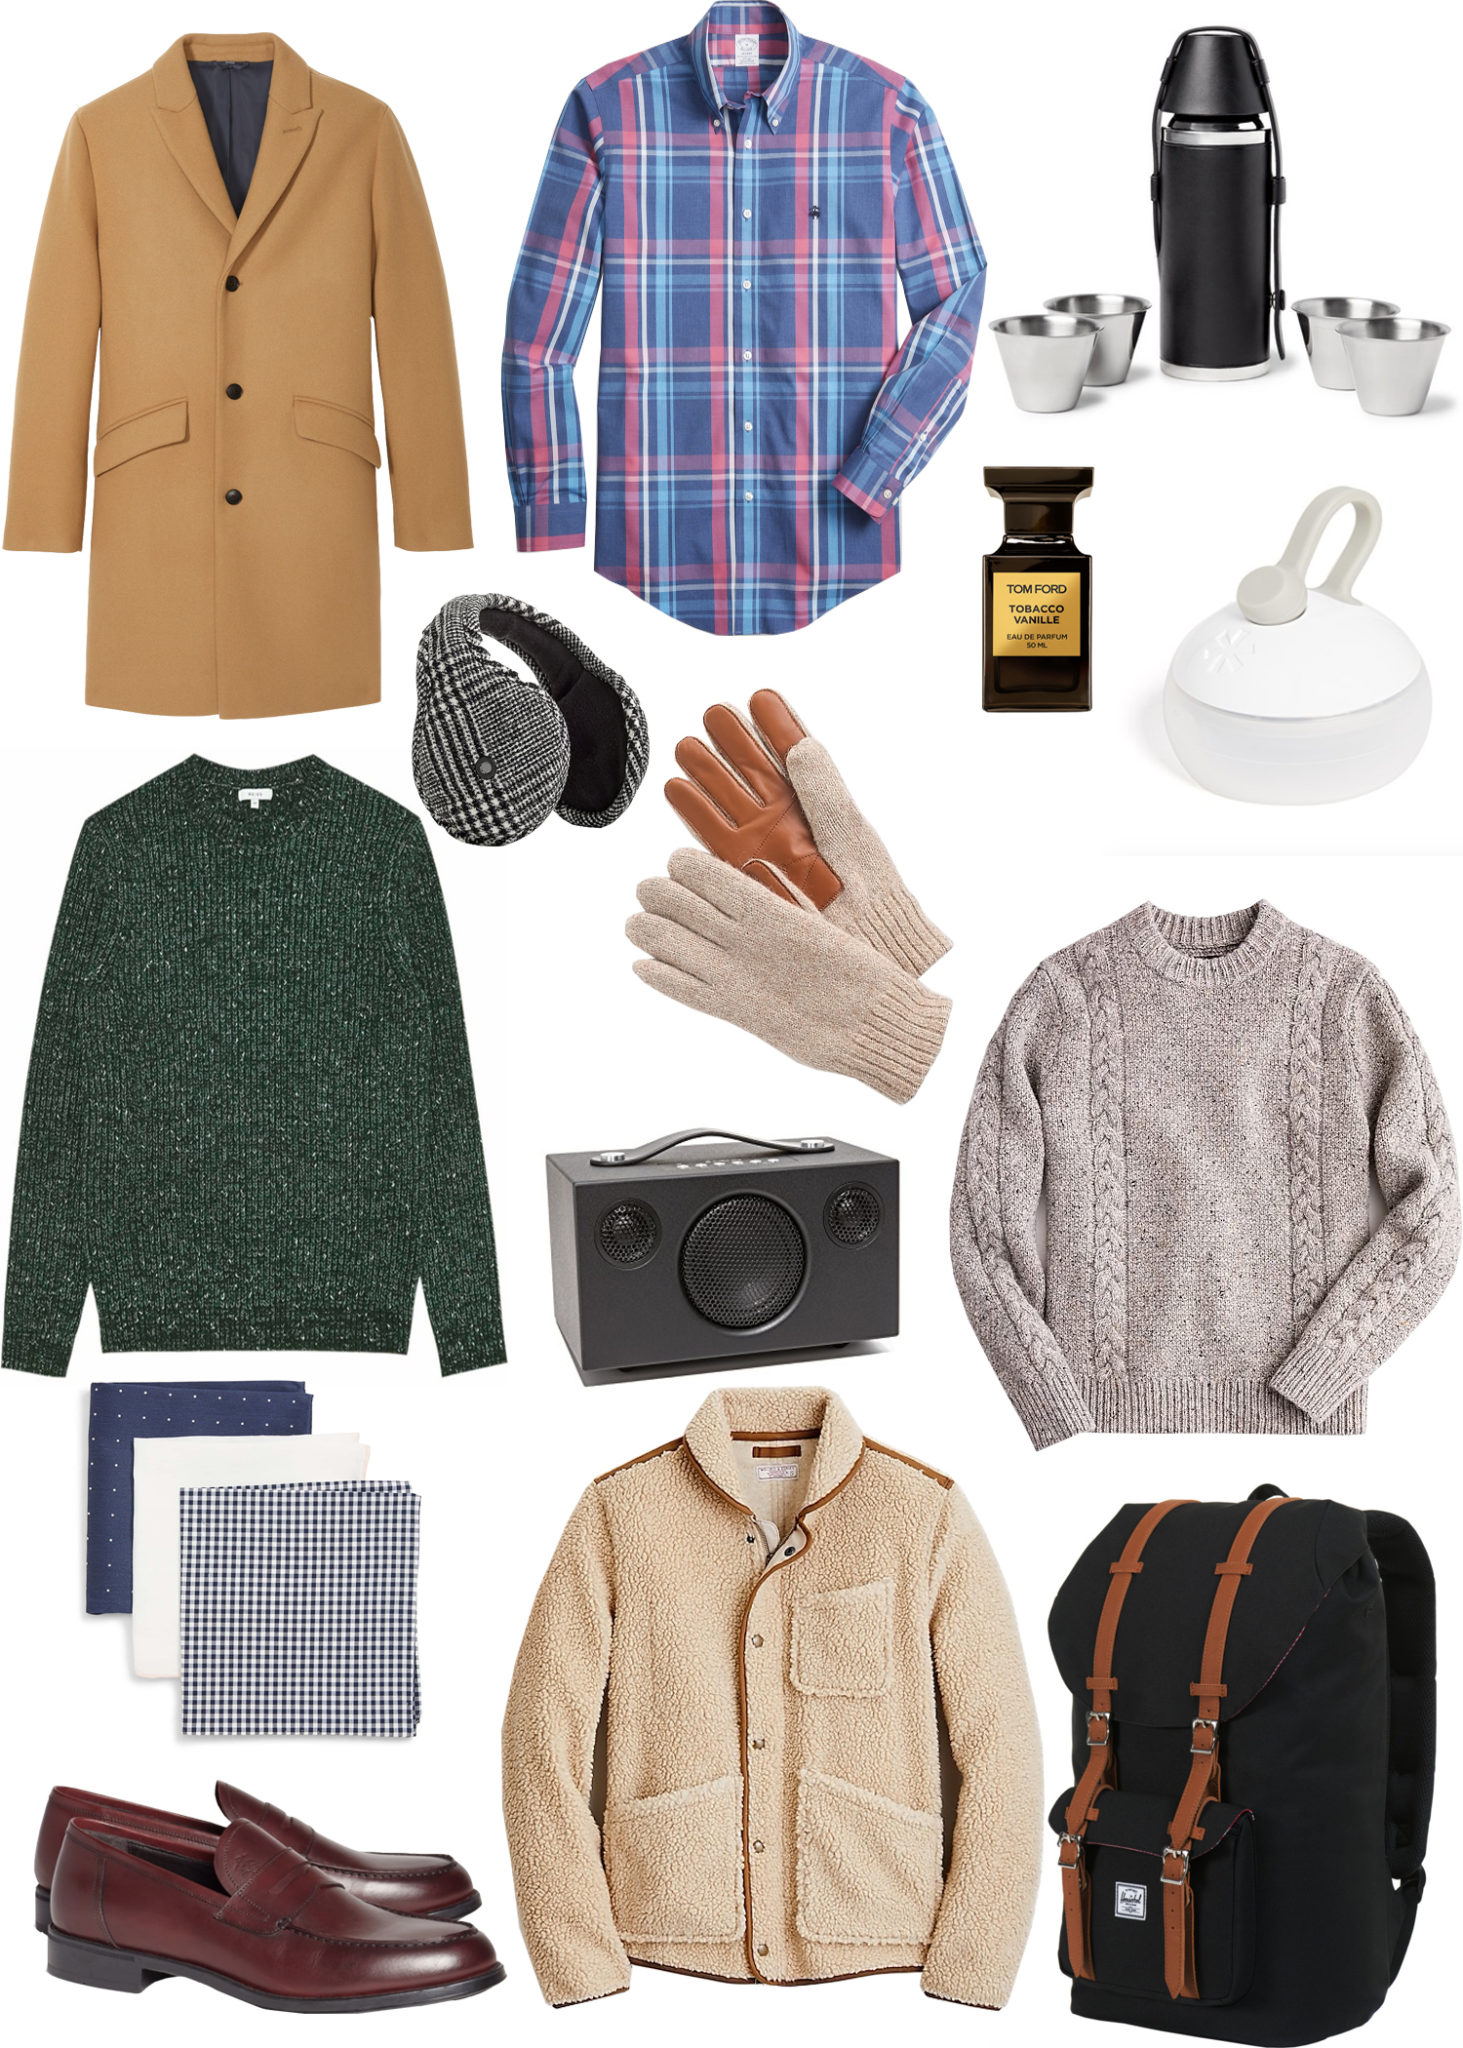 Gifts For Men